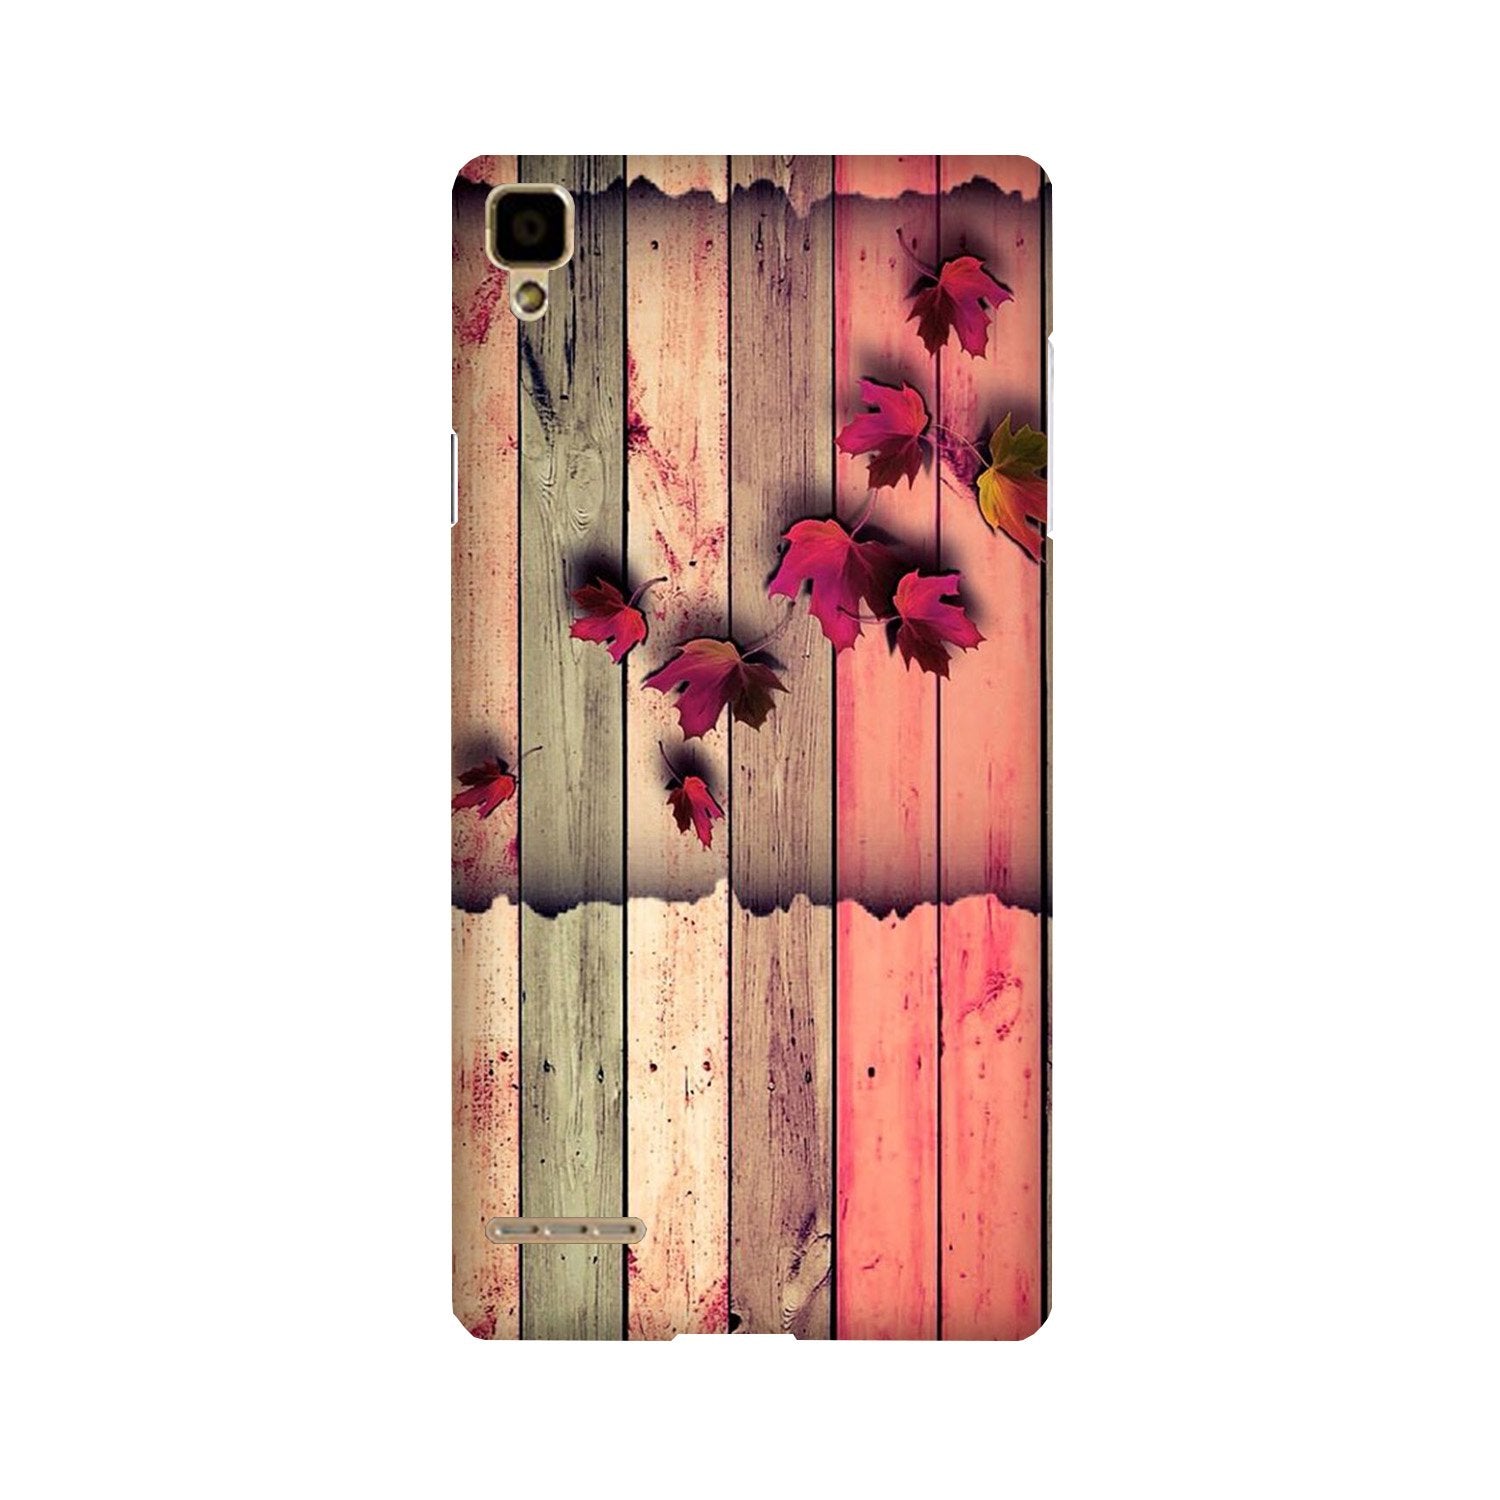 Wooden look2 Case for Oppo F1